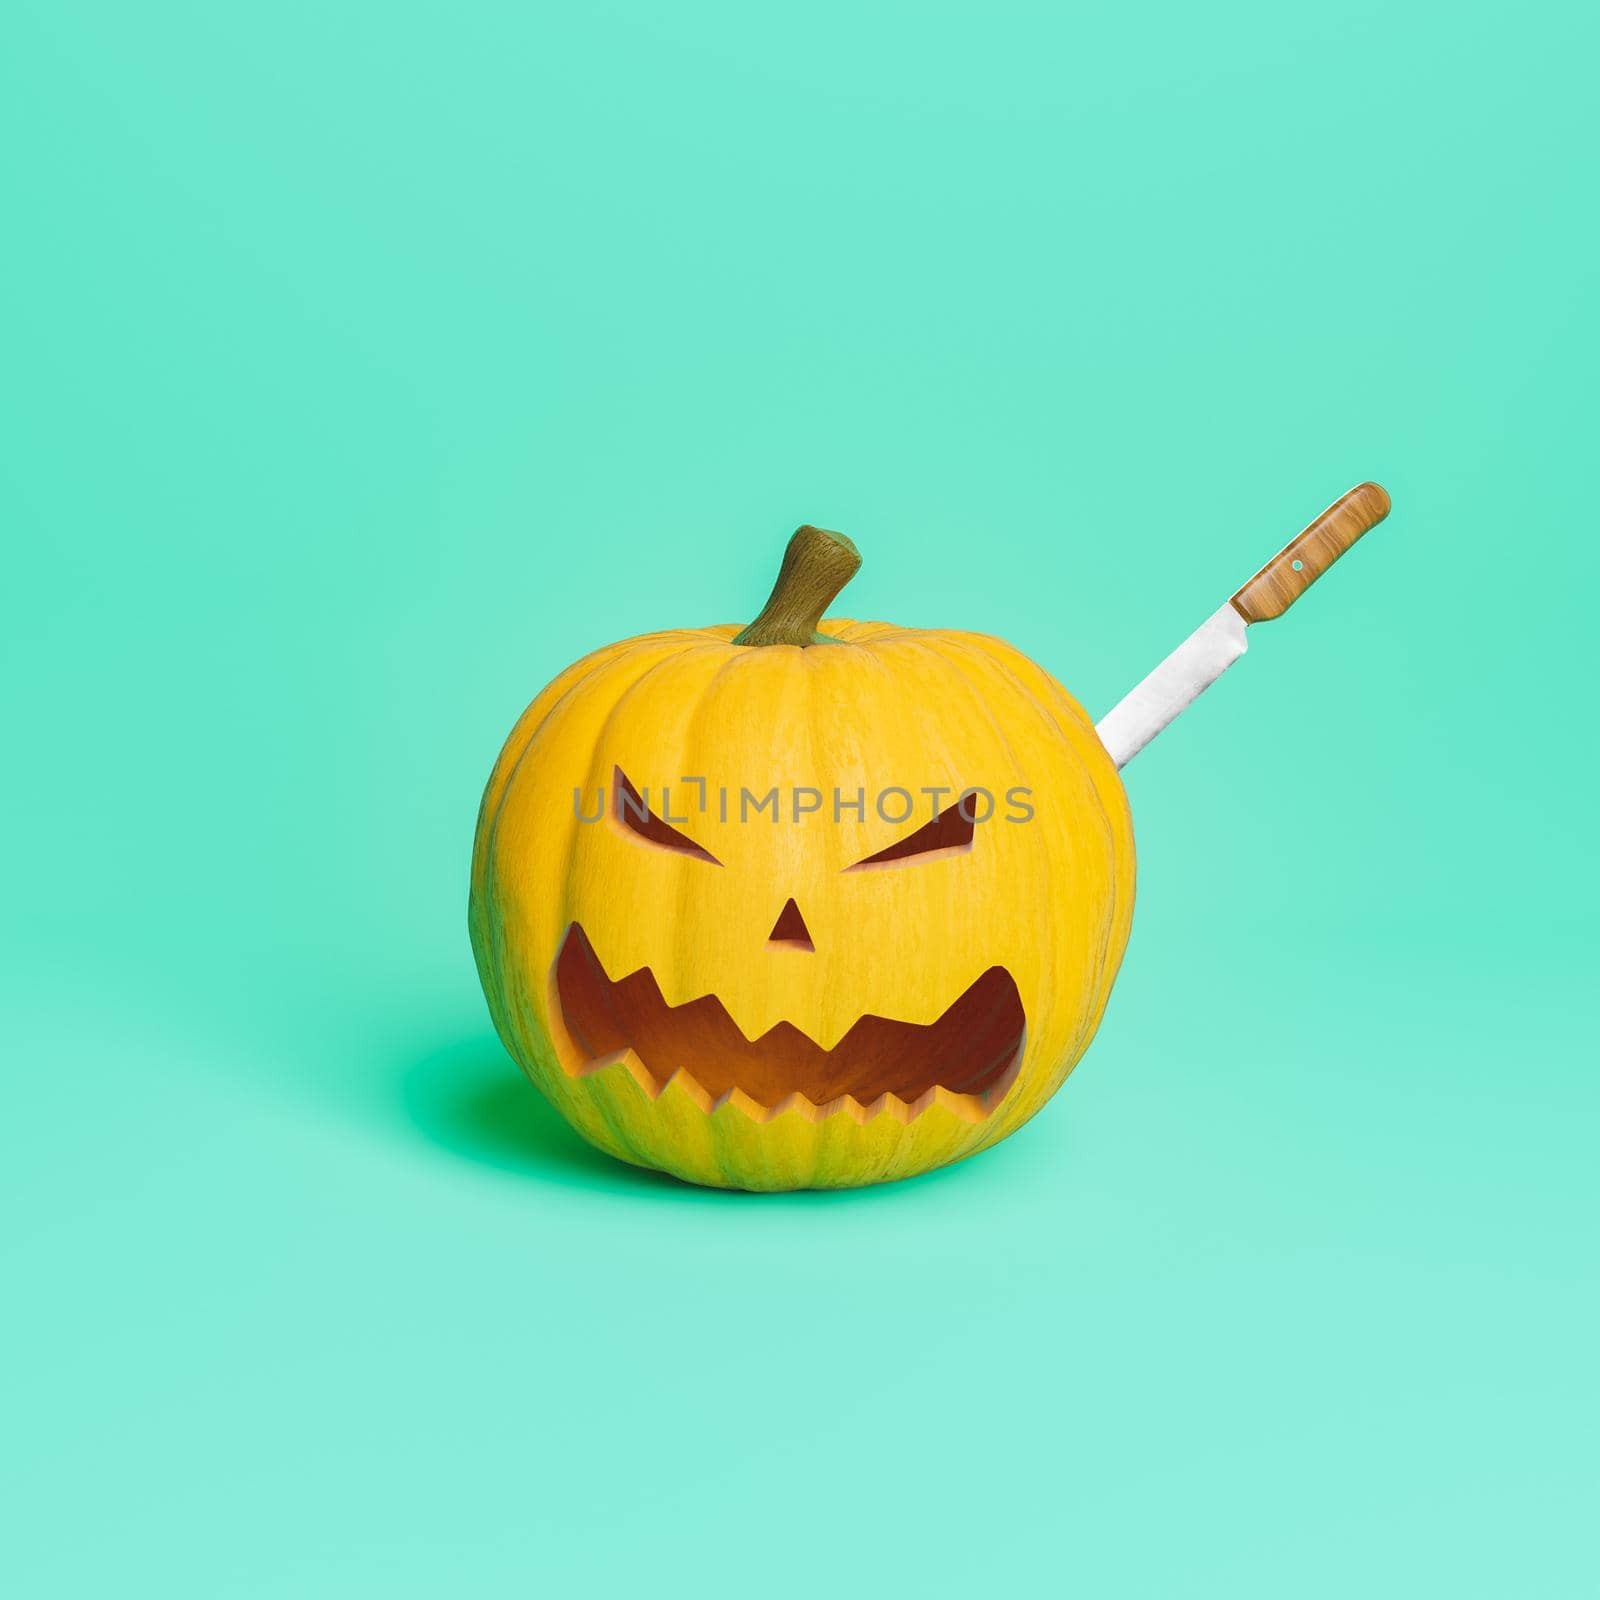 halloween pumpkin with a knife stuck in it to carve its face. halloween concept and crafts. 3d rendering